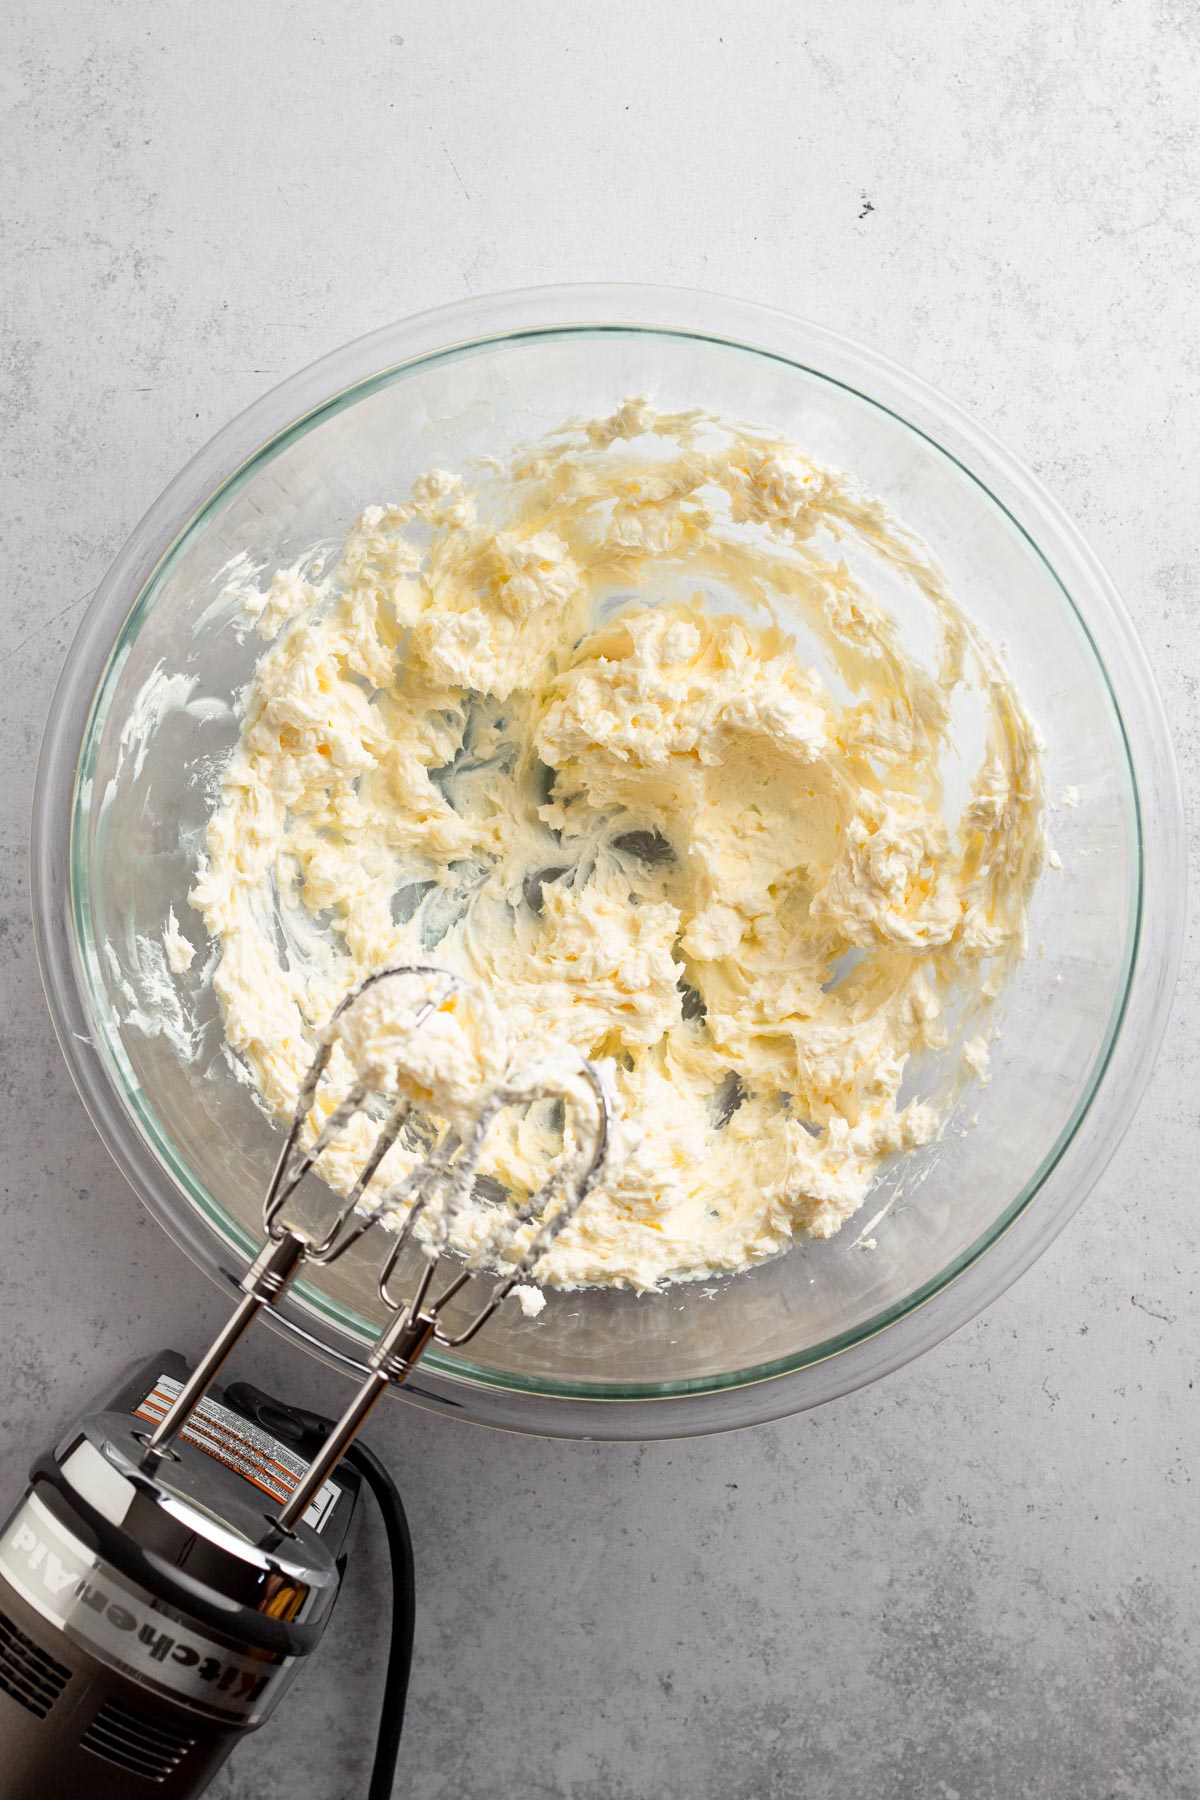 Blended cream cheese and butter in a glass bowl.